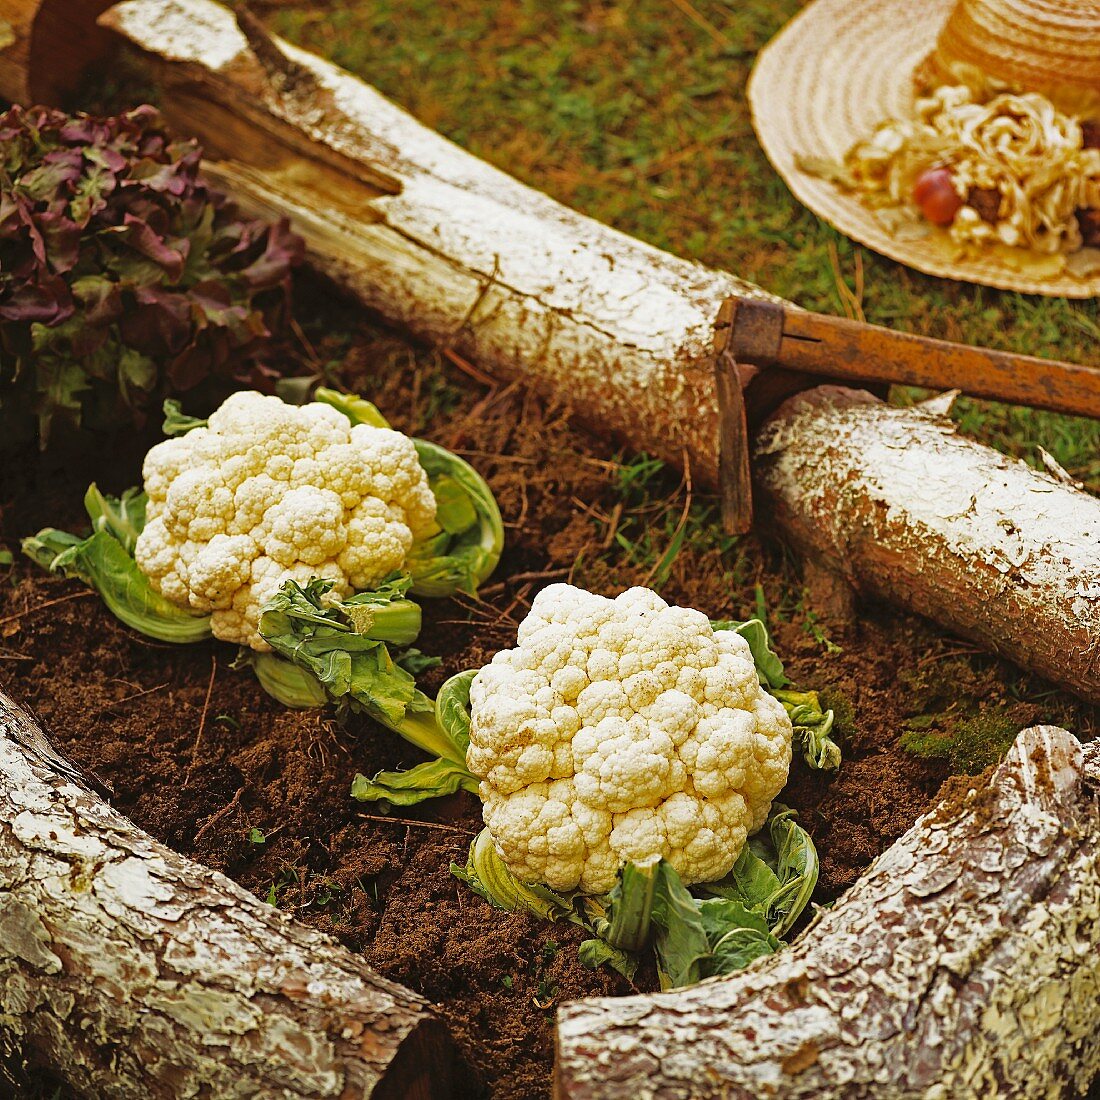 Cauliflowers and lettuce in a vegetable patch